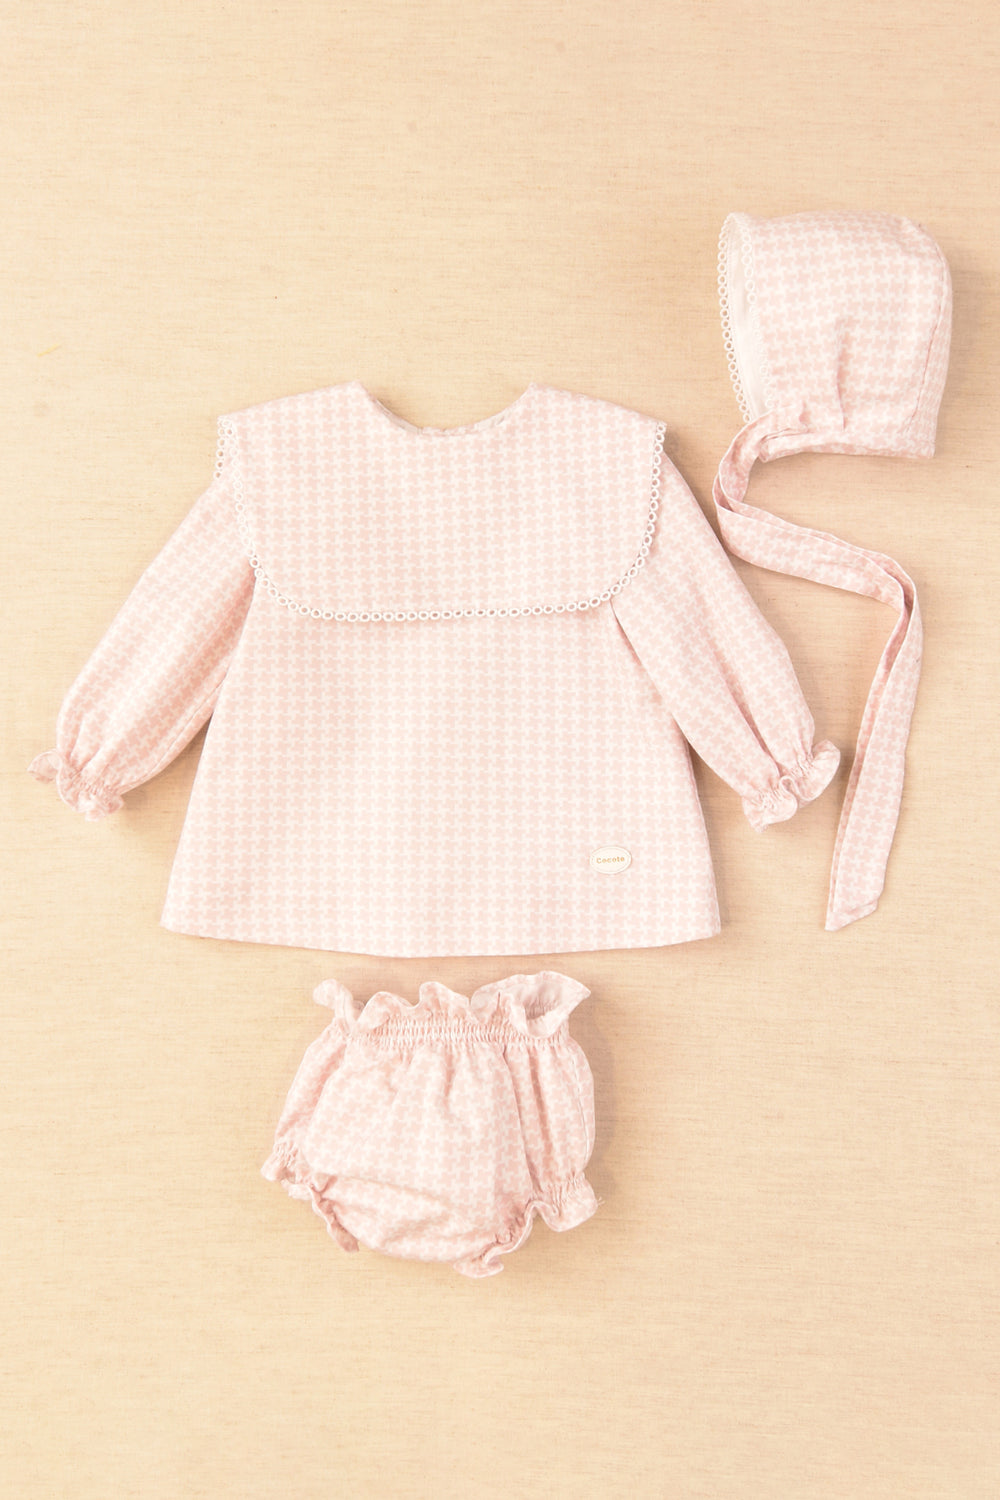 Cocote "Emmeline" Pink Houndstooth Dress, Bloomers & Bonnet | iphoneandroidapplications